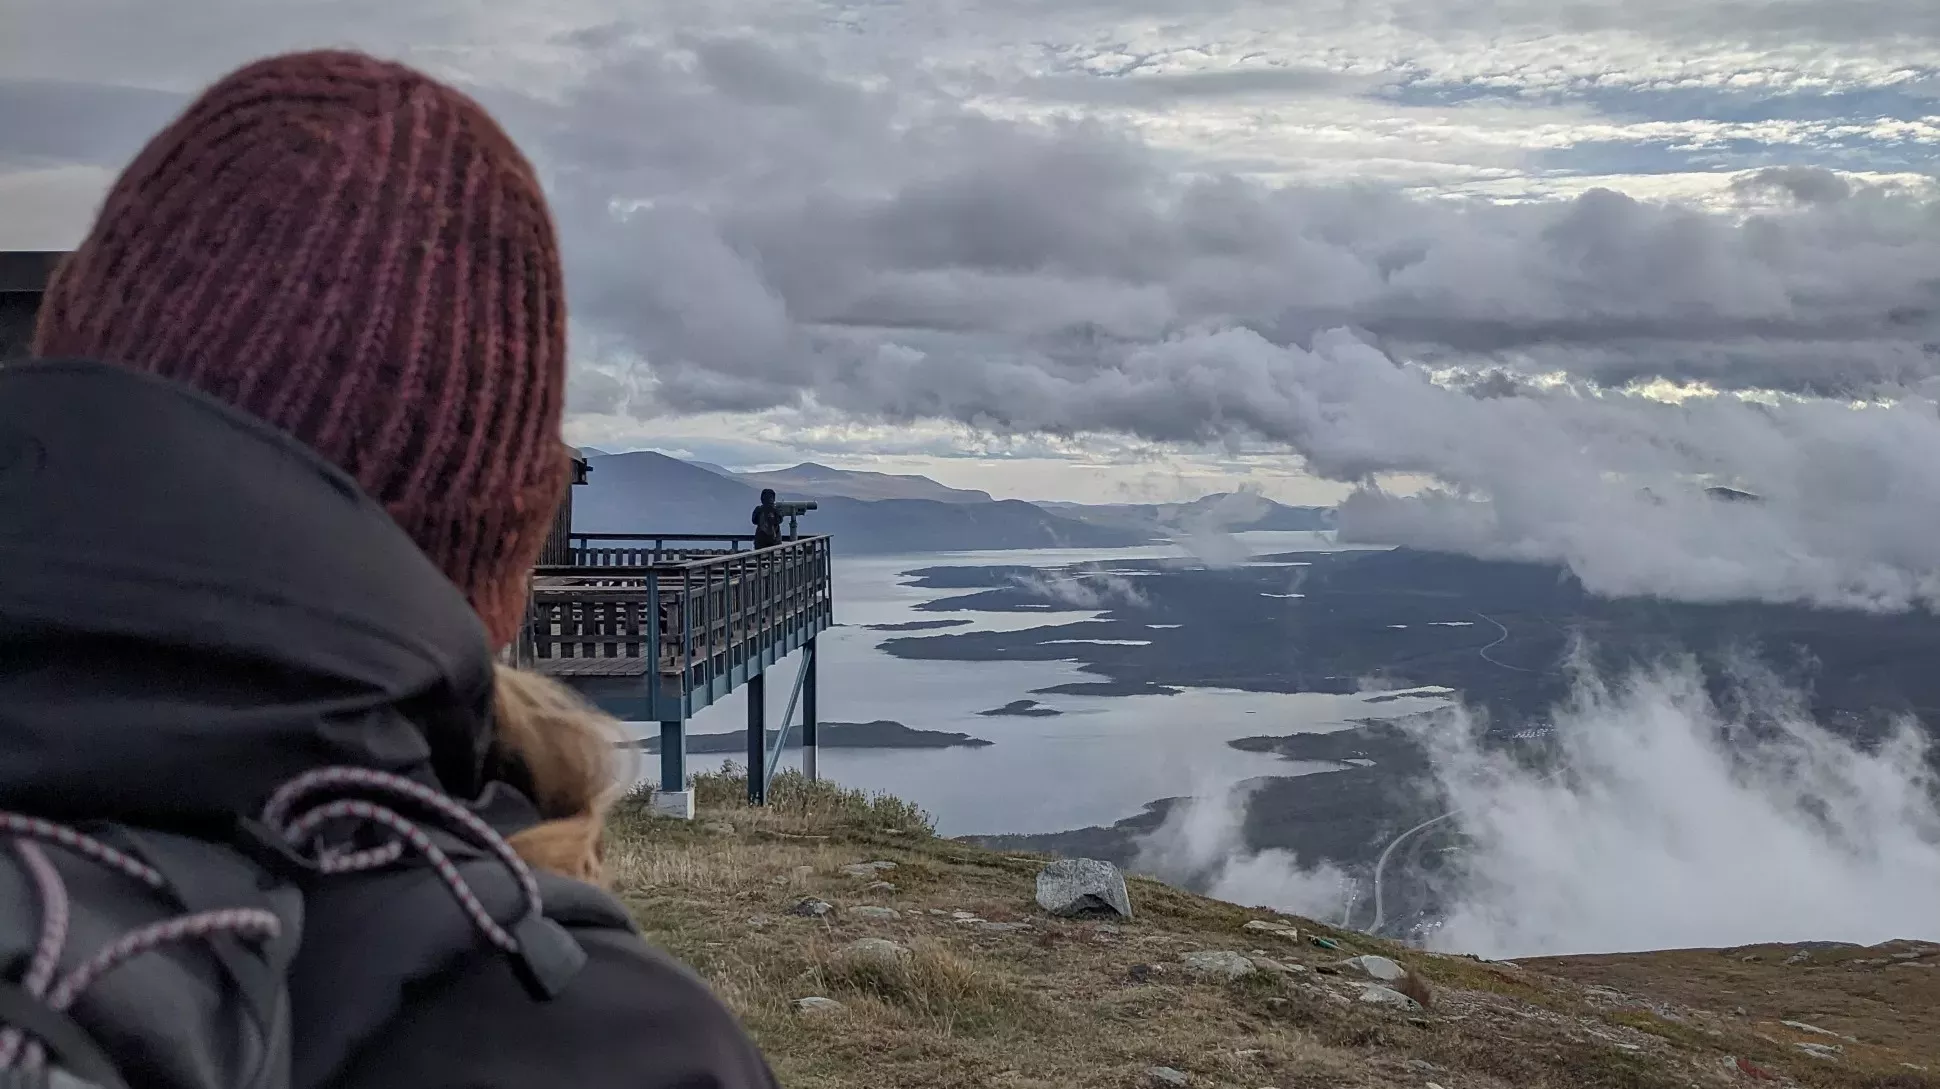 A person in a red woolen hat looking out over a cloudy mountainscape